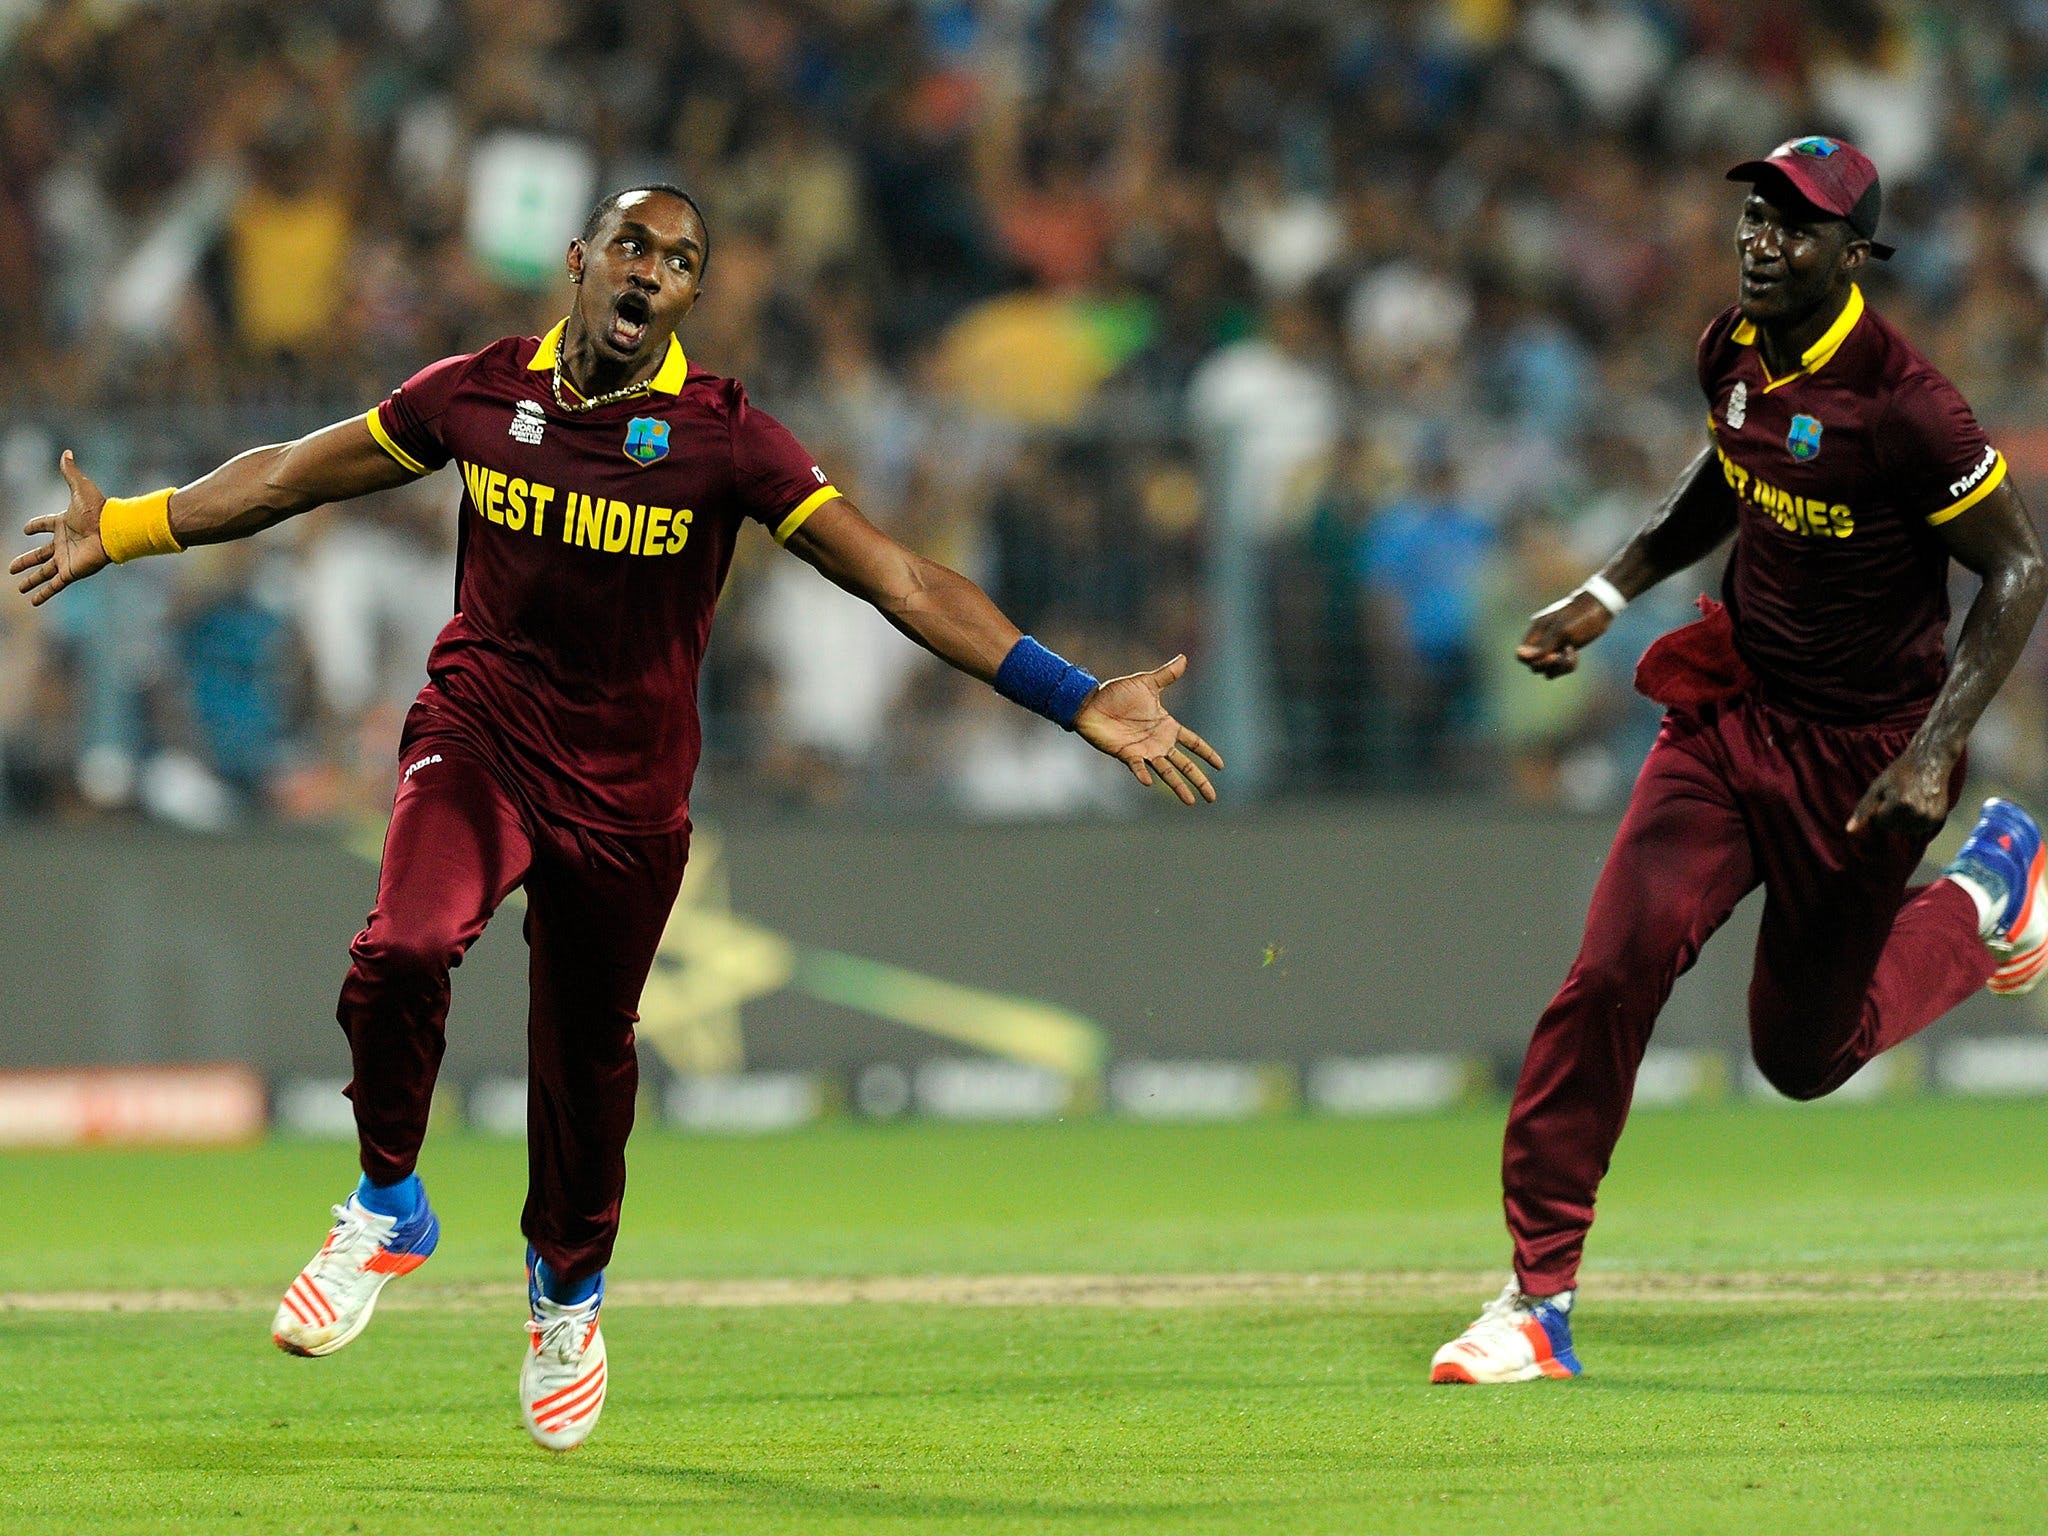 ICC Men's T20 World Cup - West Indies v Qualifier B2 - Accommodation Search